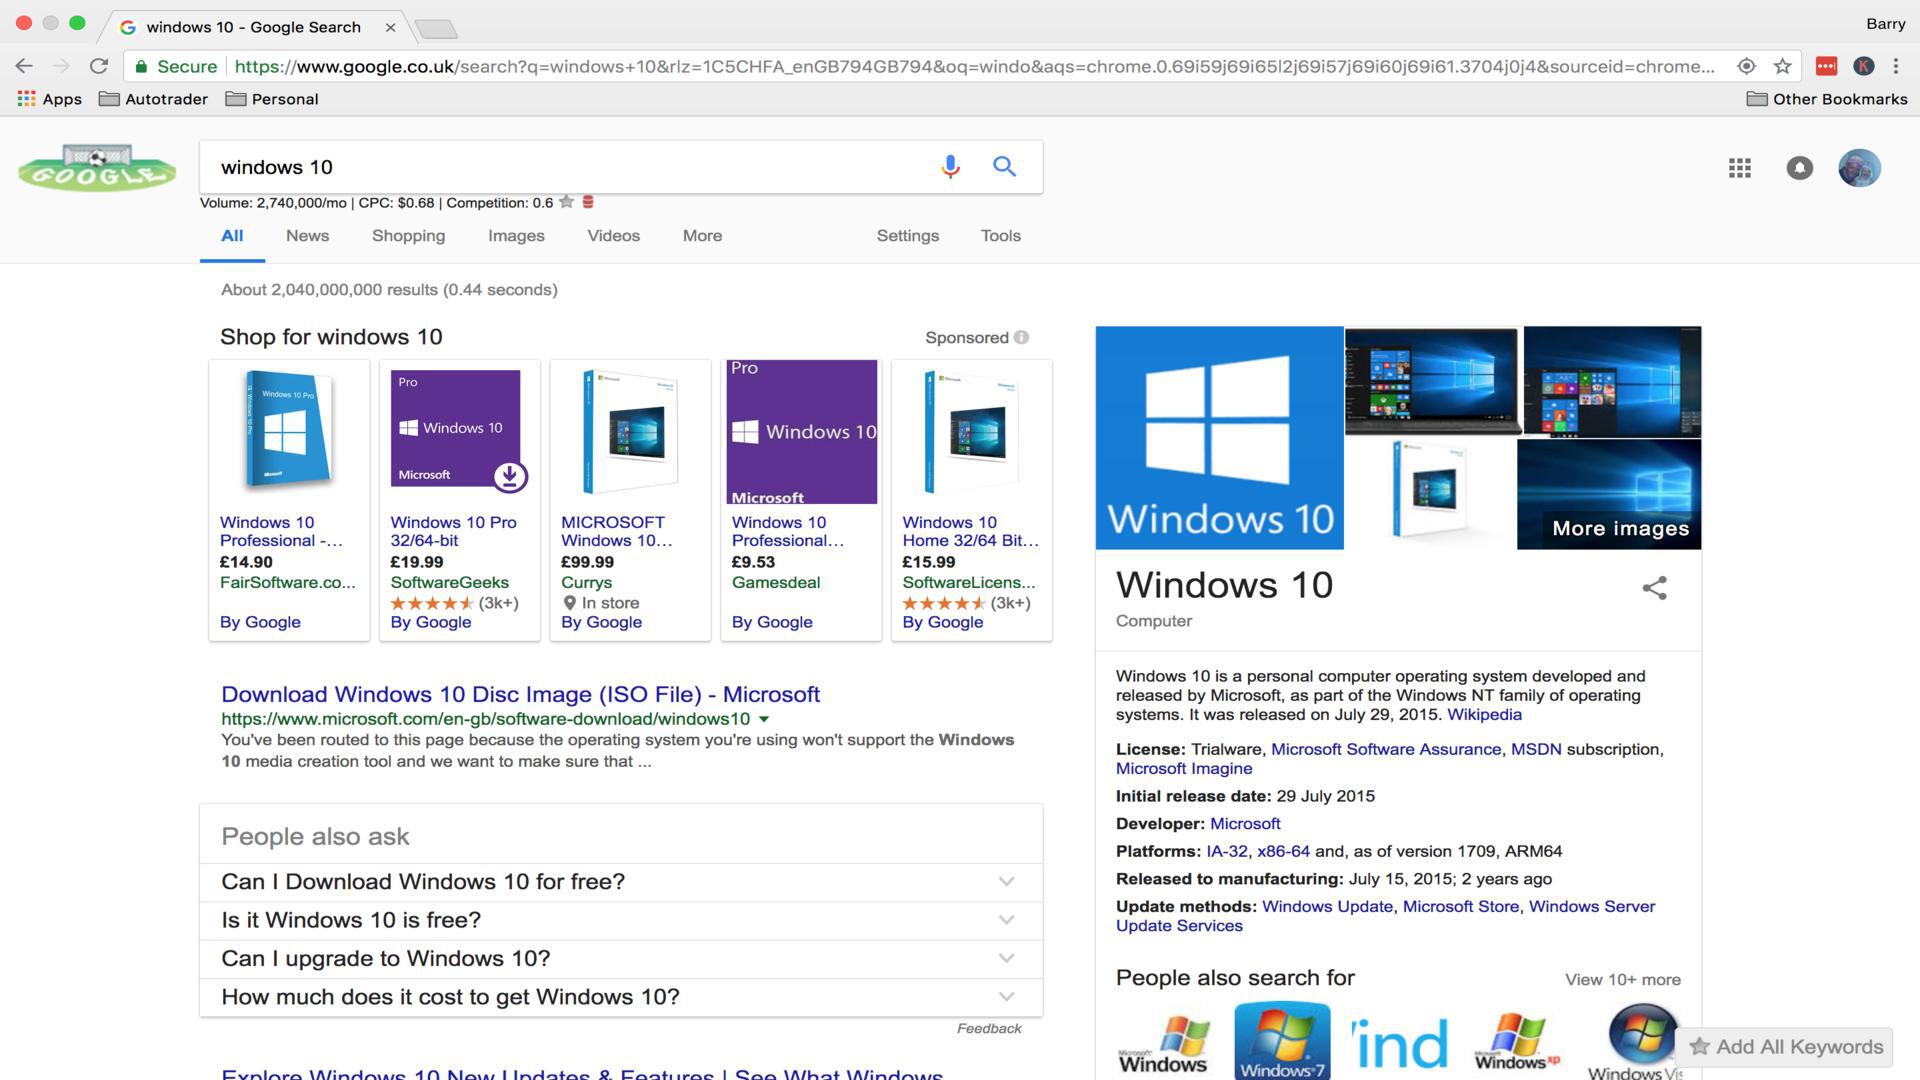 Windows 10 Search Engine Results Pages